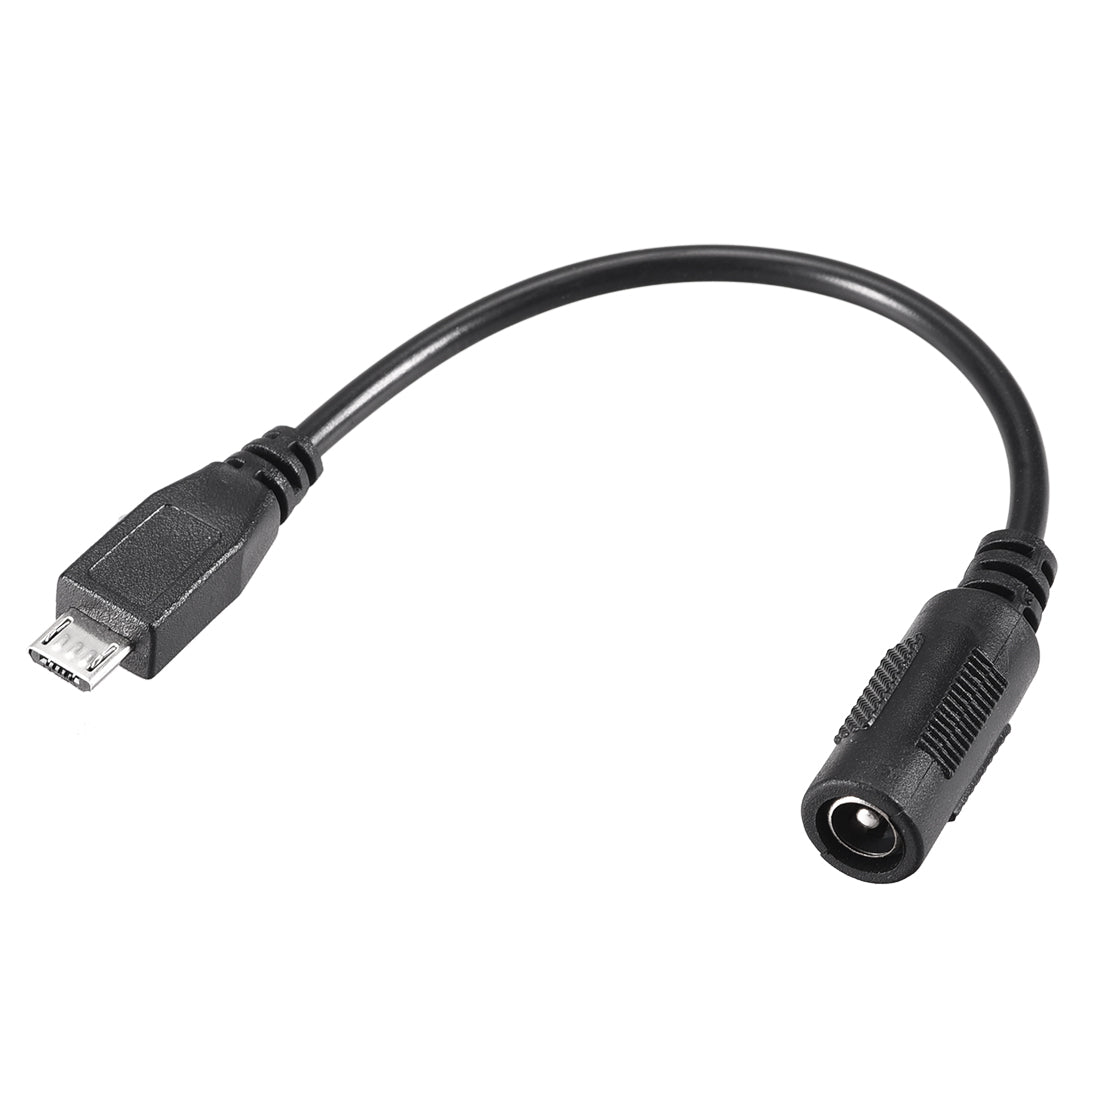 uxcell Uxcell 17cm DC Female Power Supply 5.5x2.1mm Adapter to Micro USB Plug Male Cable